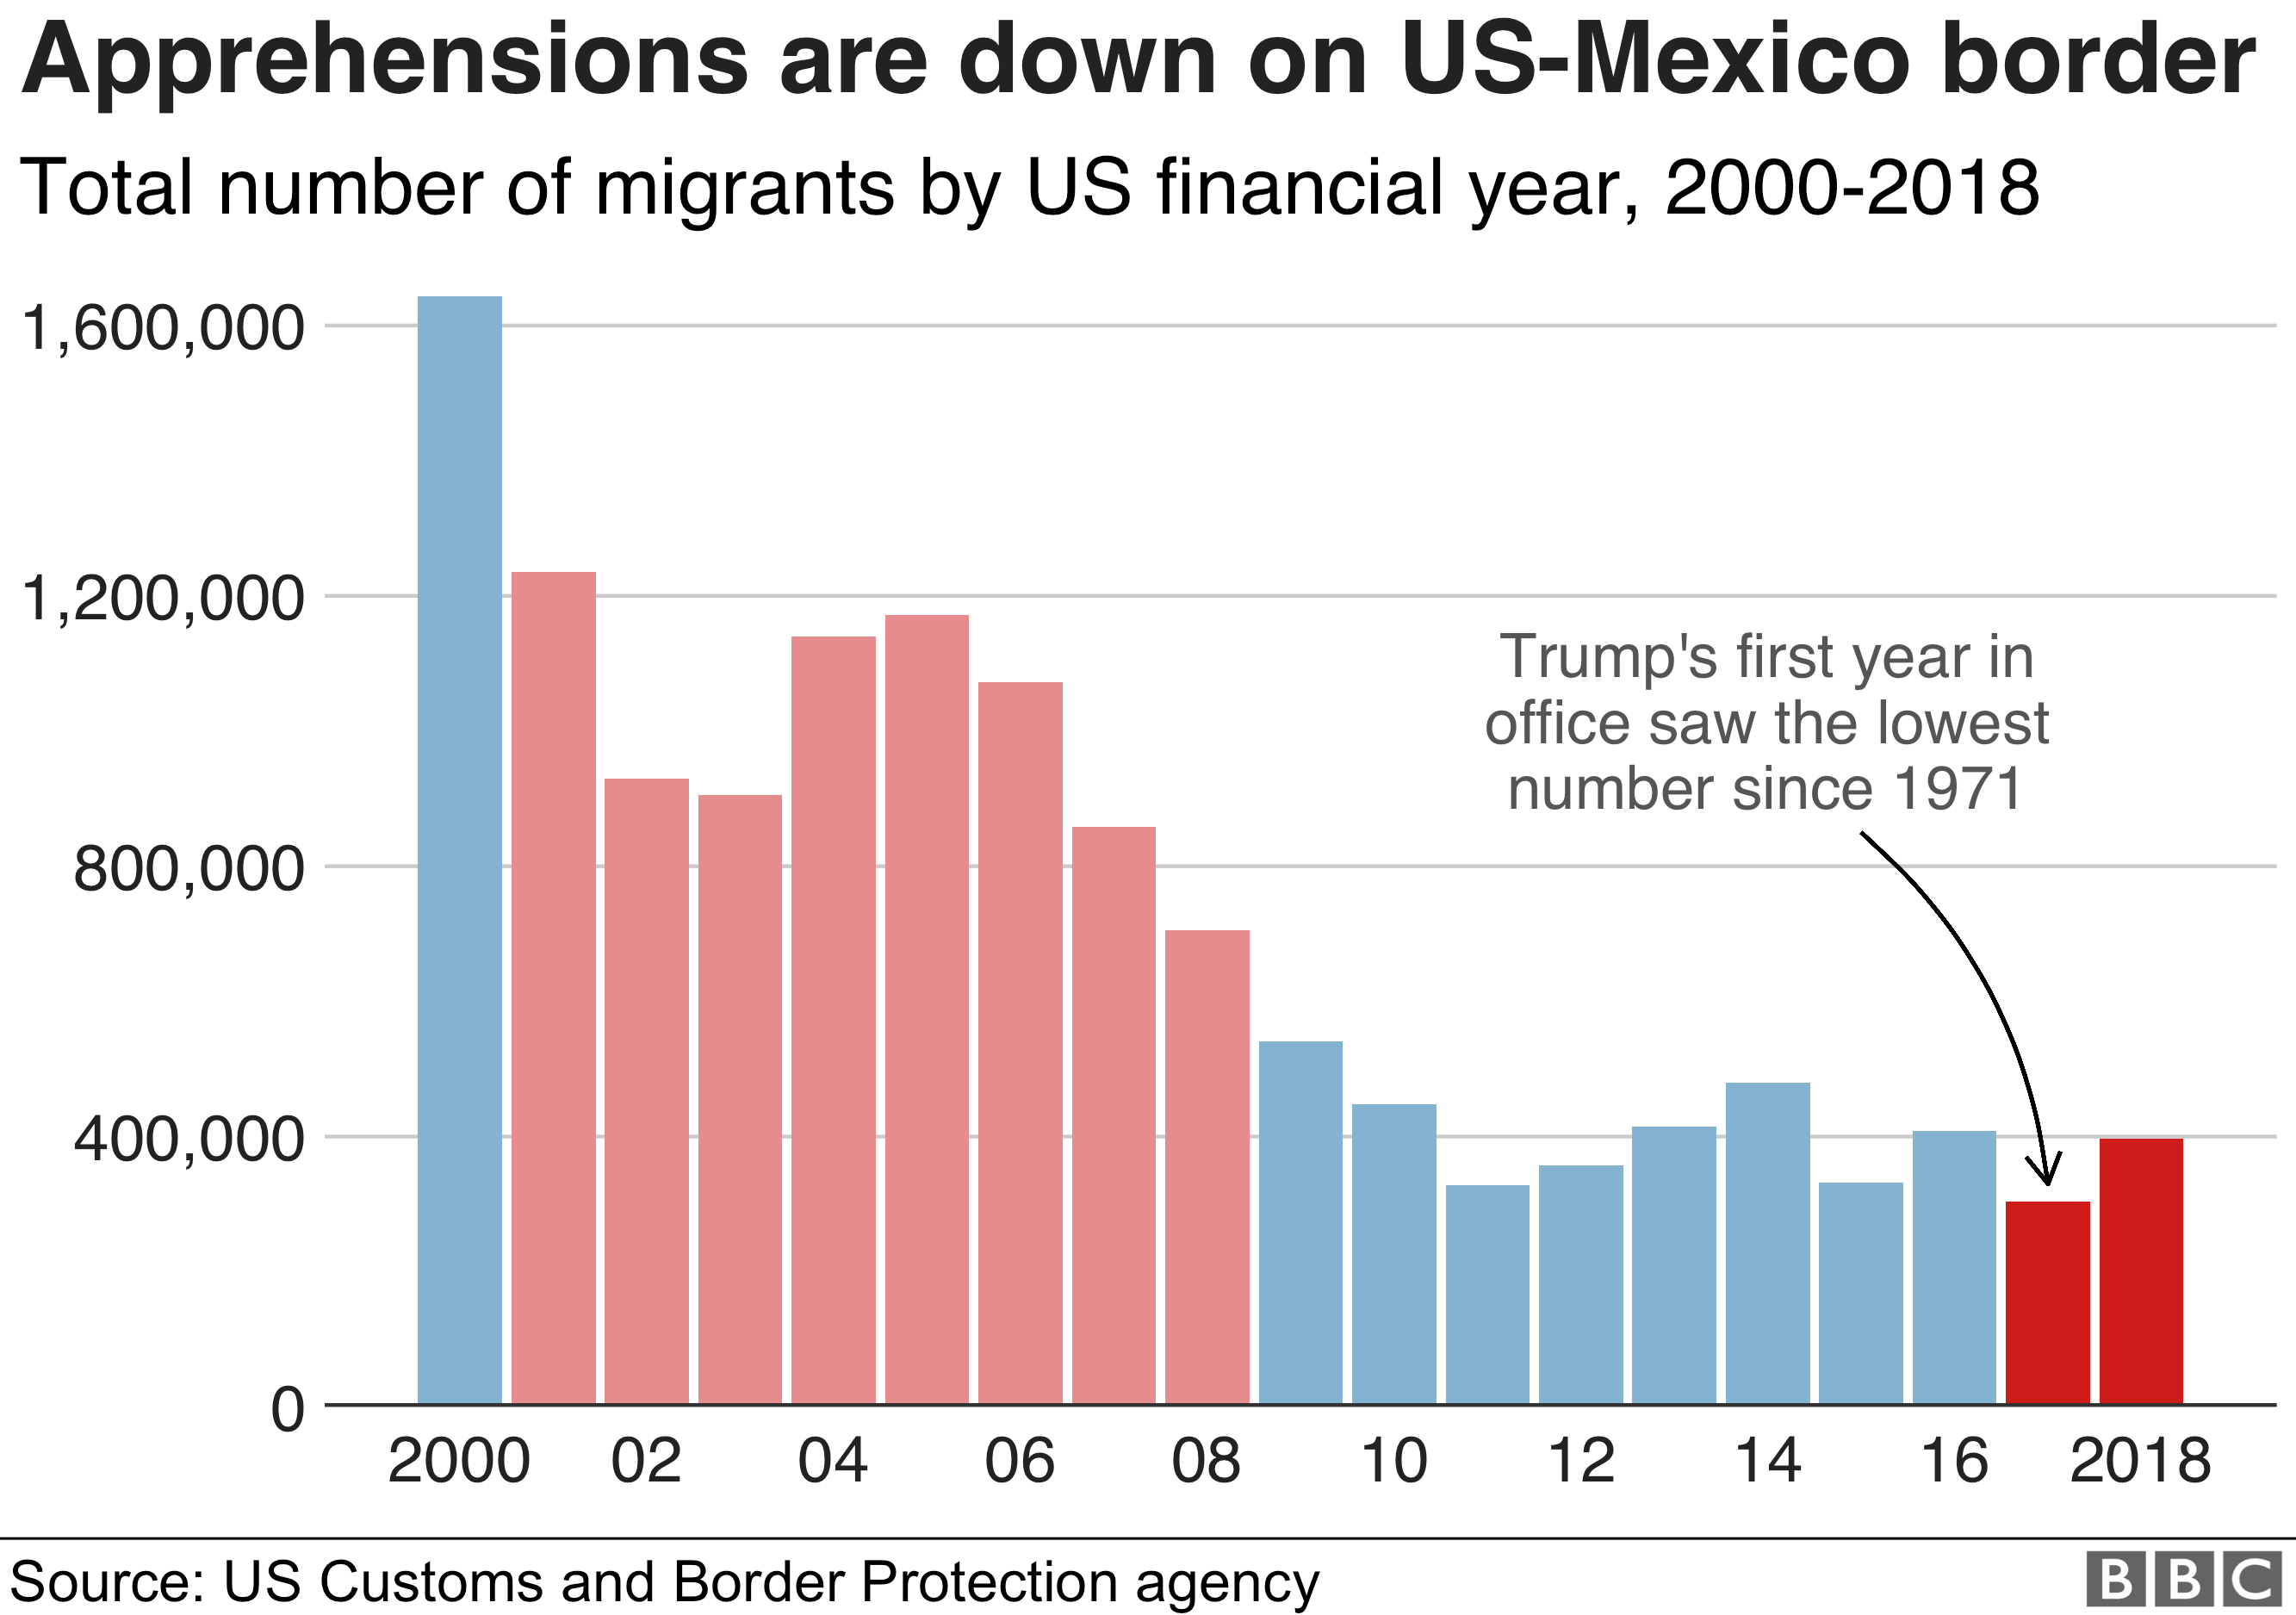 Bar chart showing apprehensions on the US-Mexico border have fallen since 2000